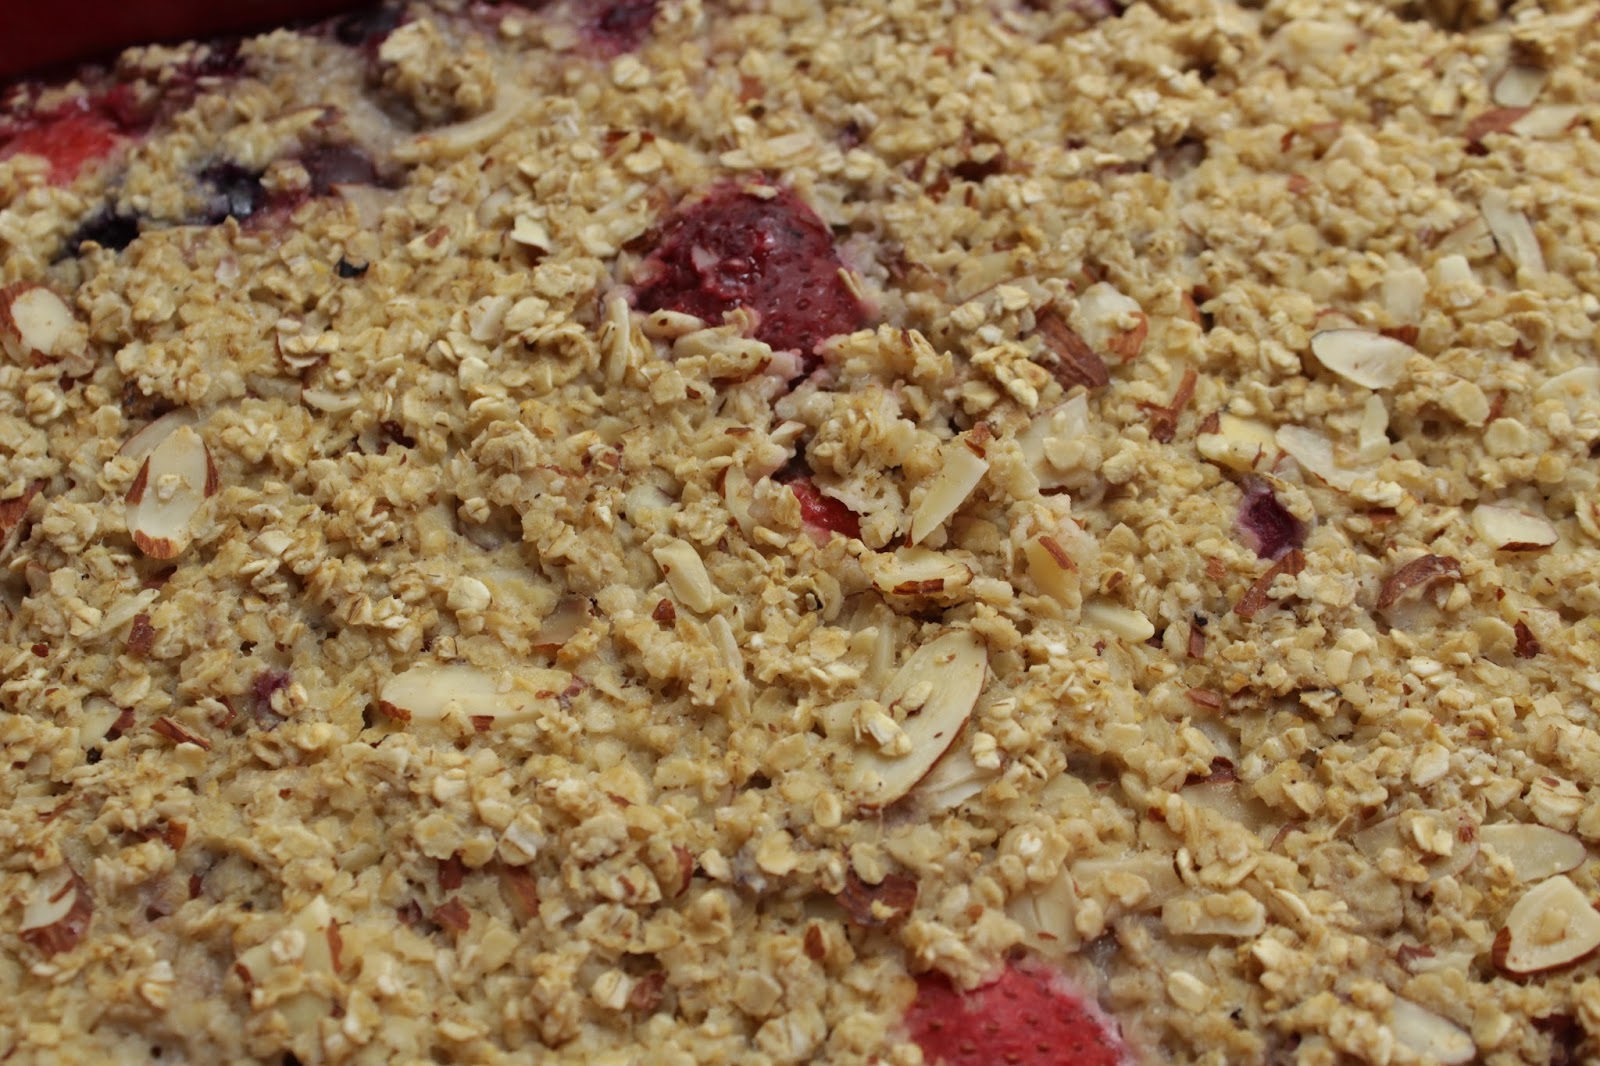 Baked Oatmeal with Berries and Almonds